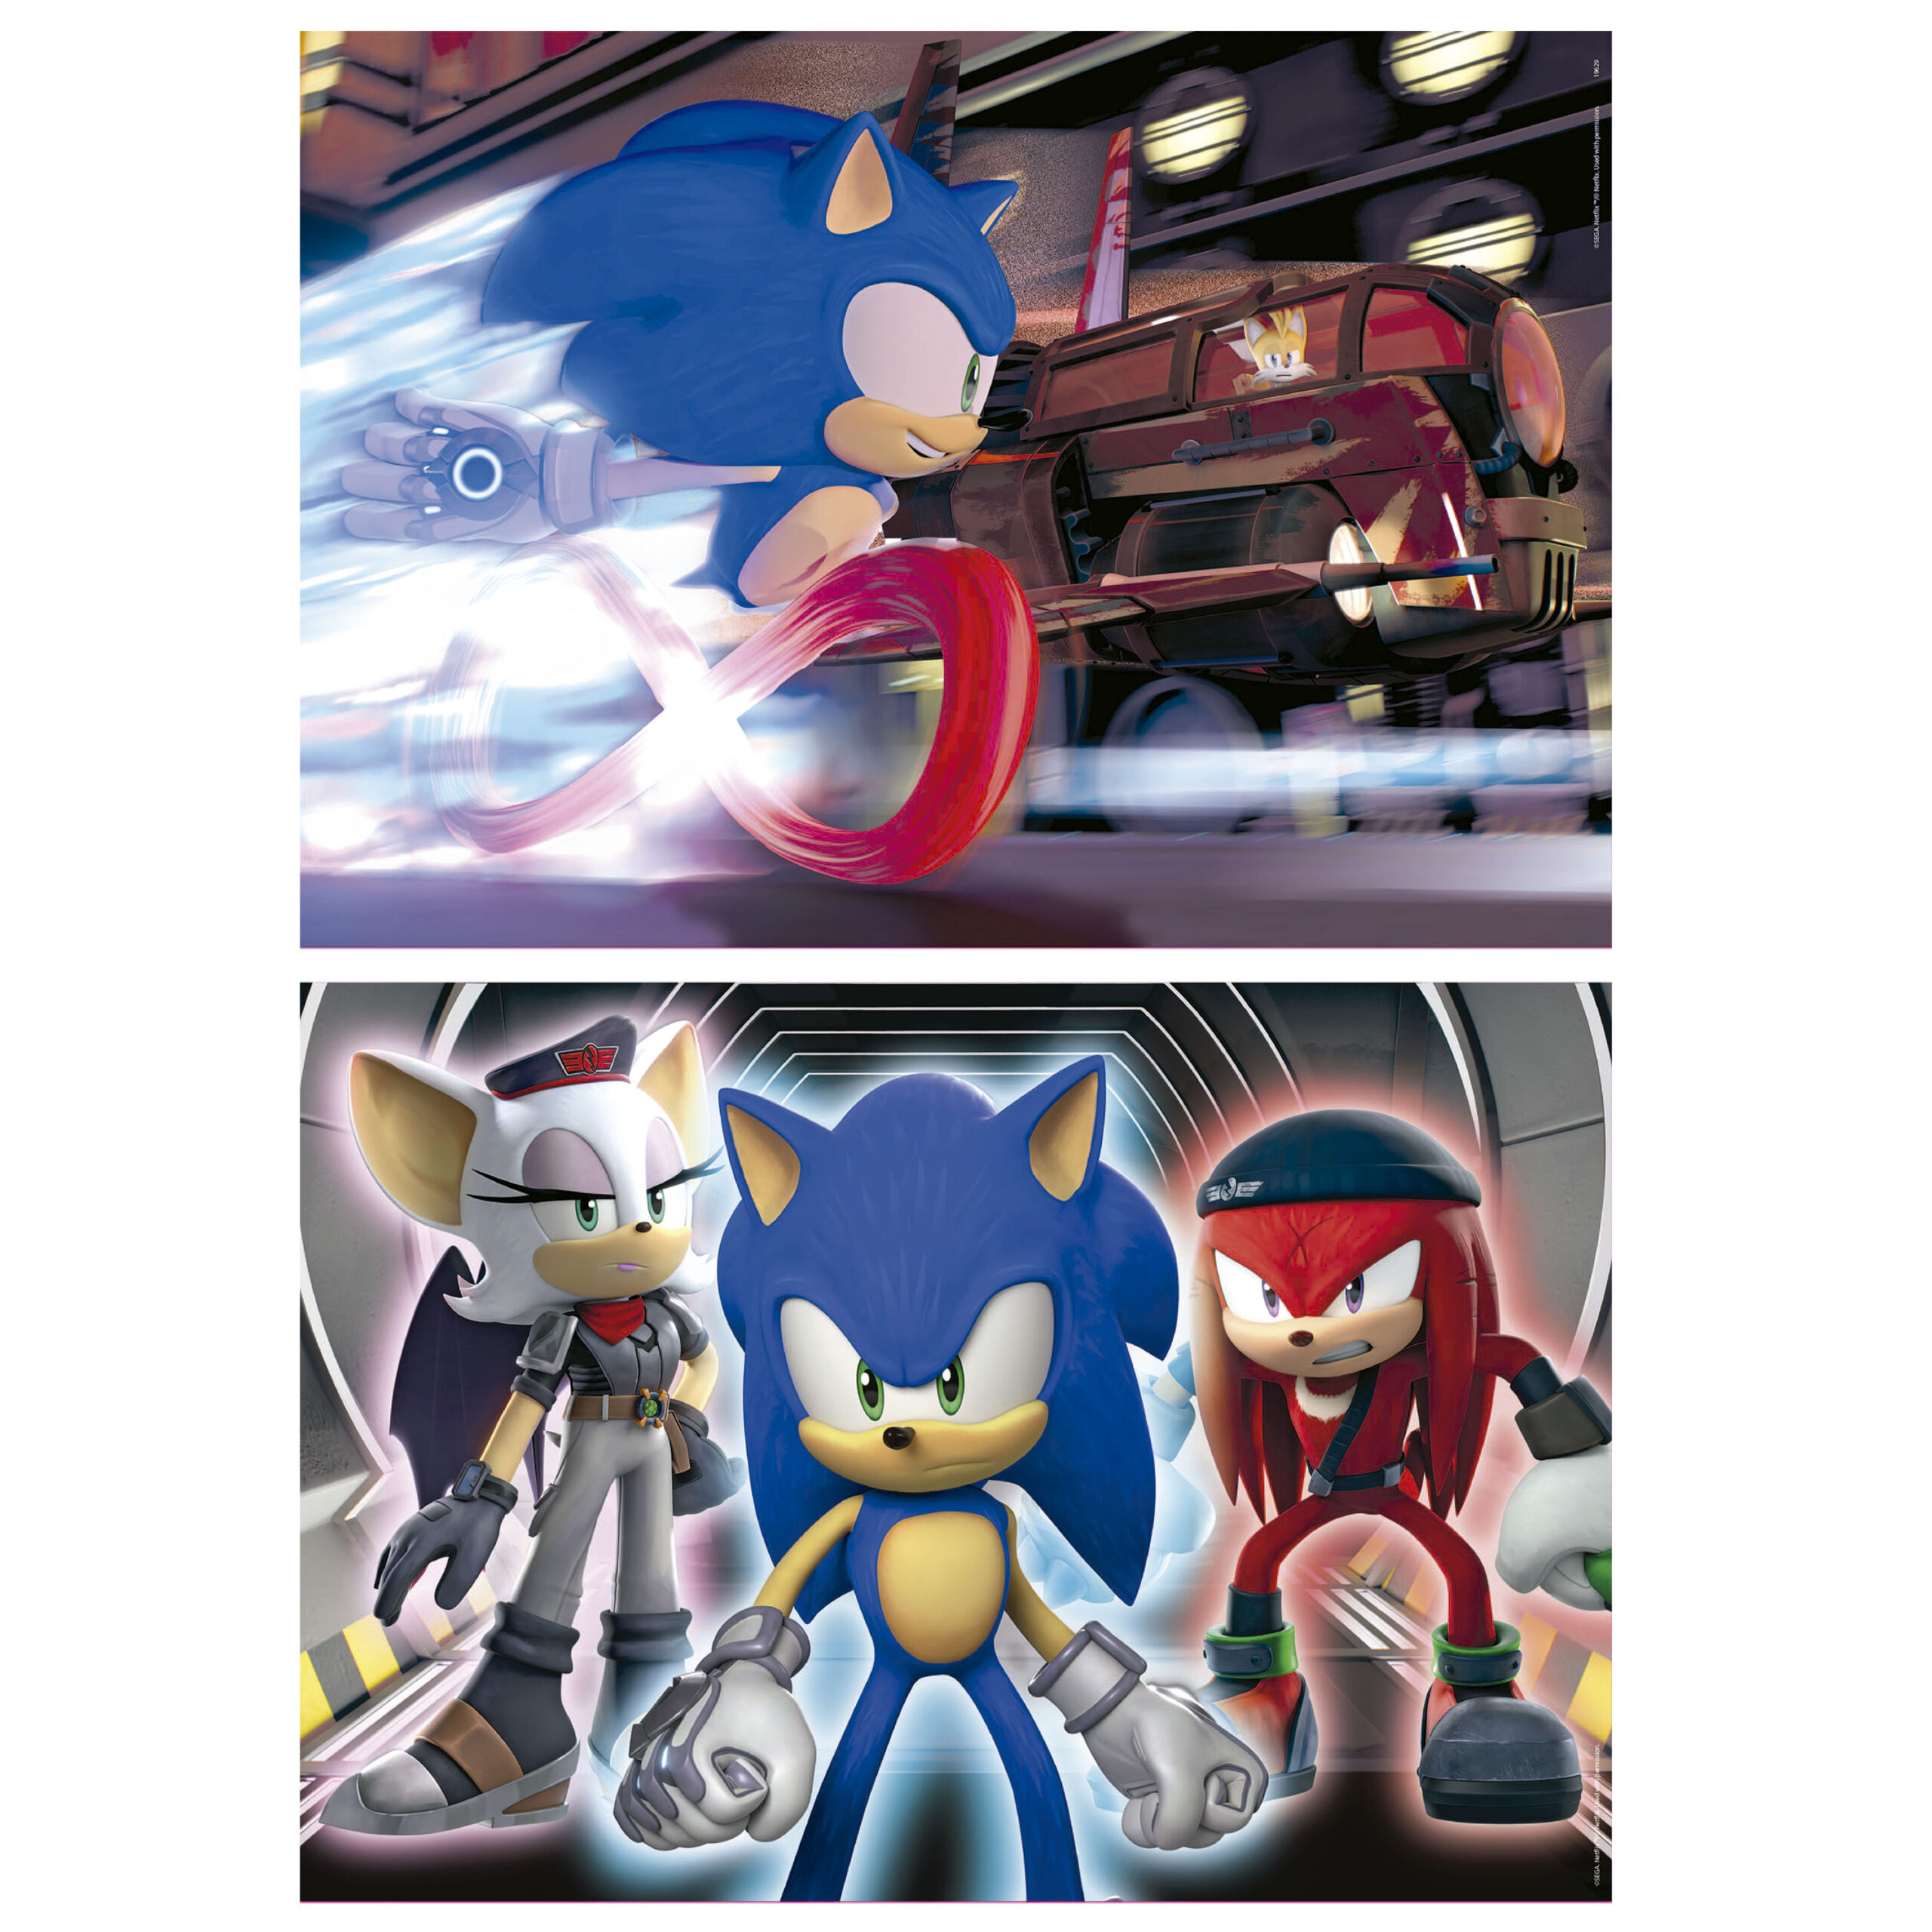 100+] Sonic 2 Pictures